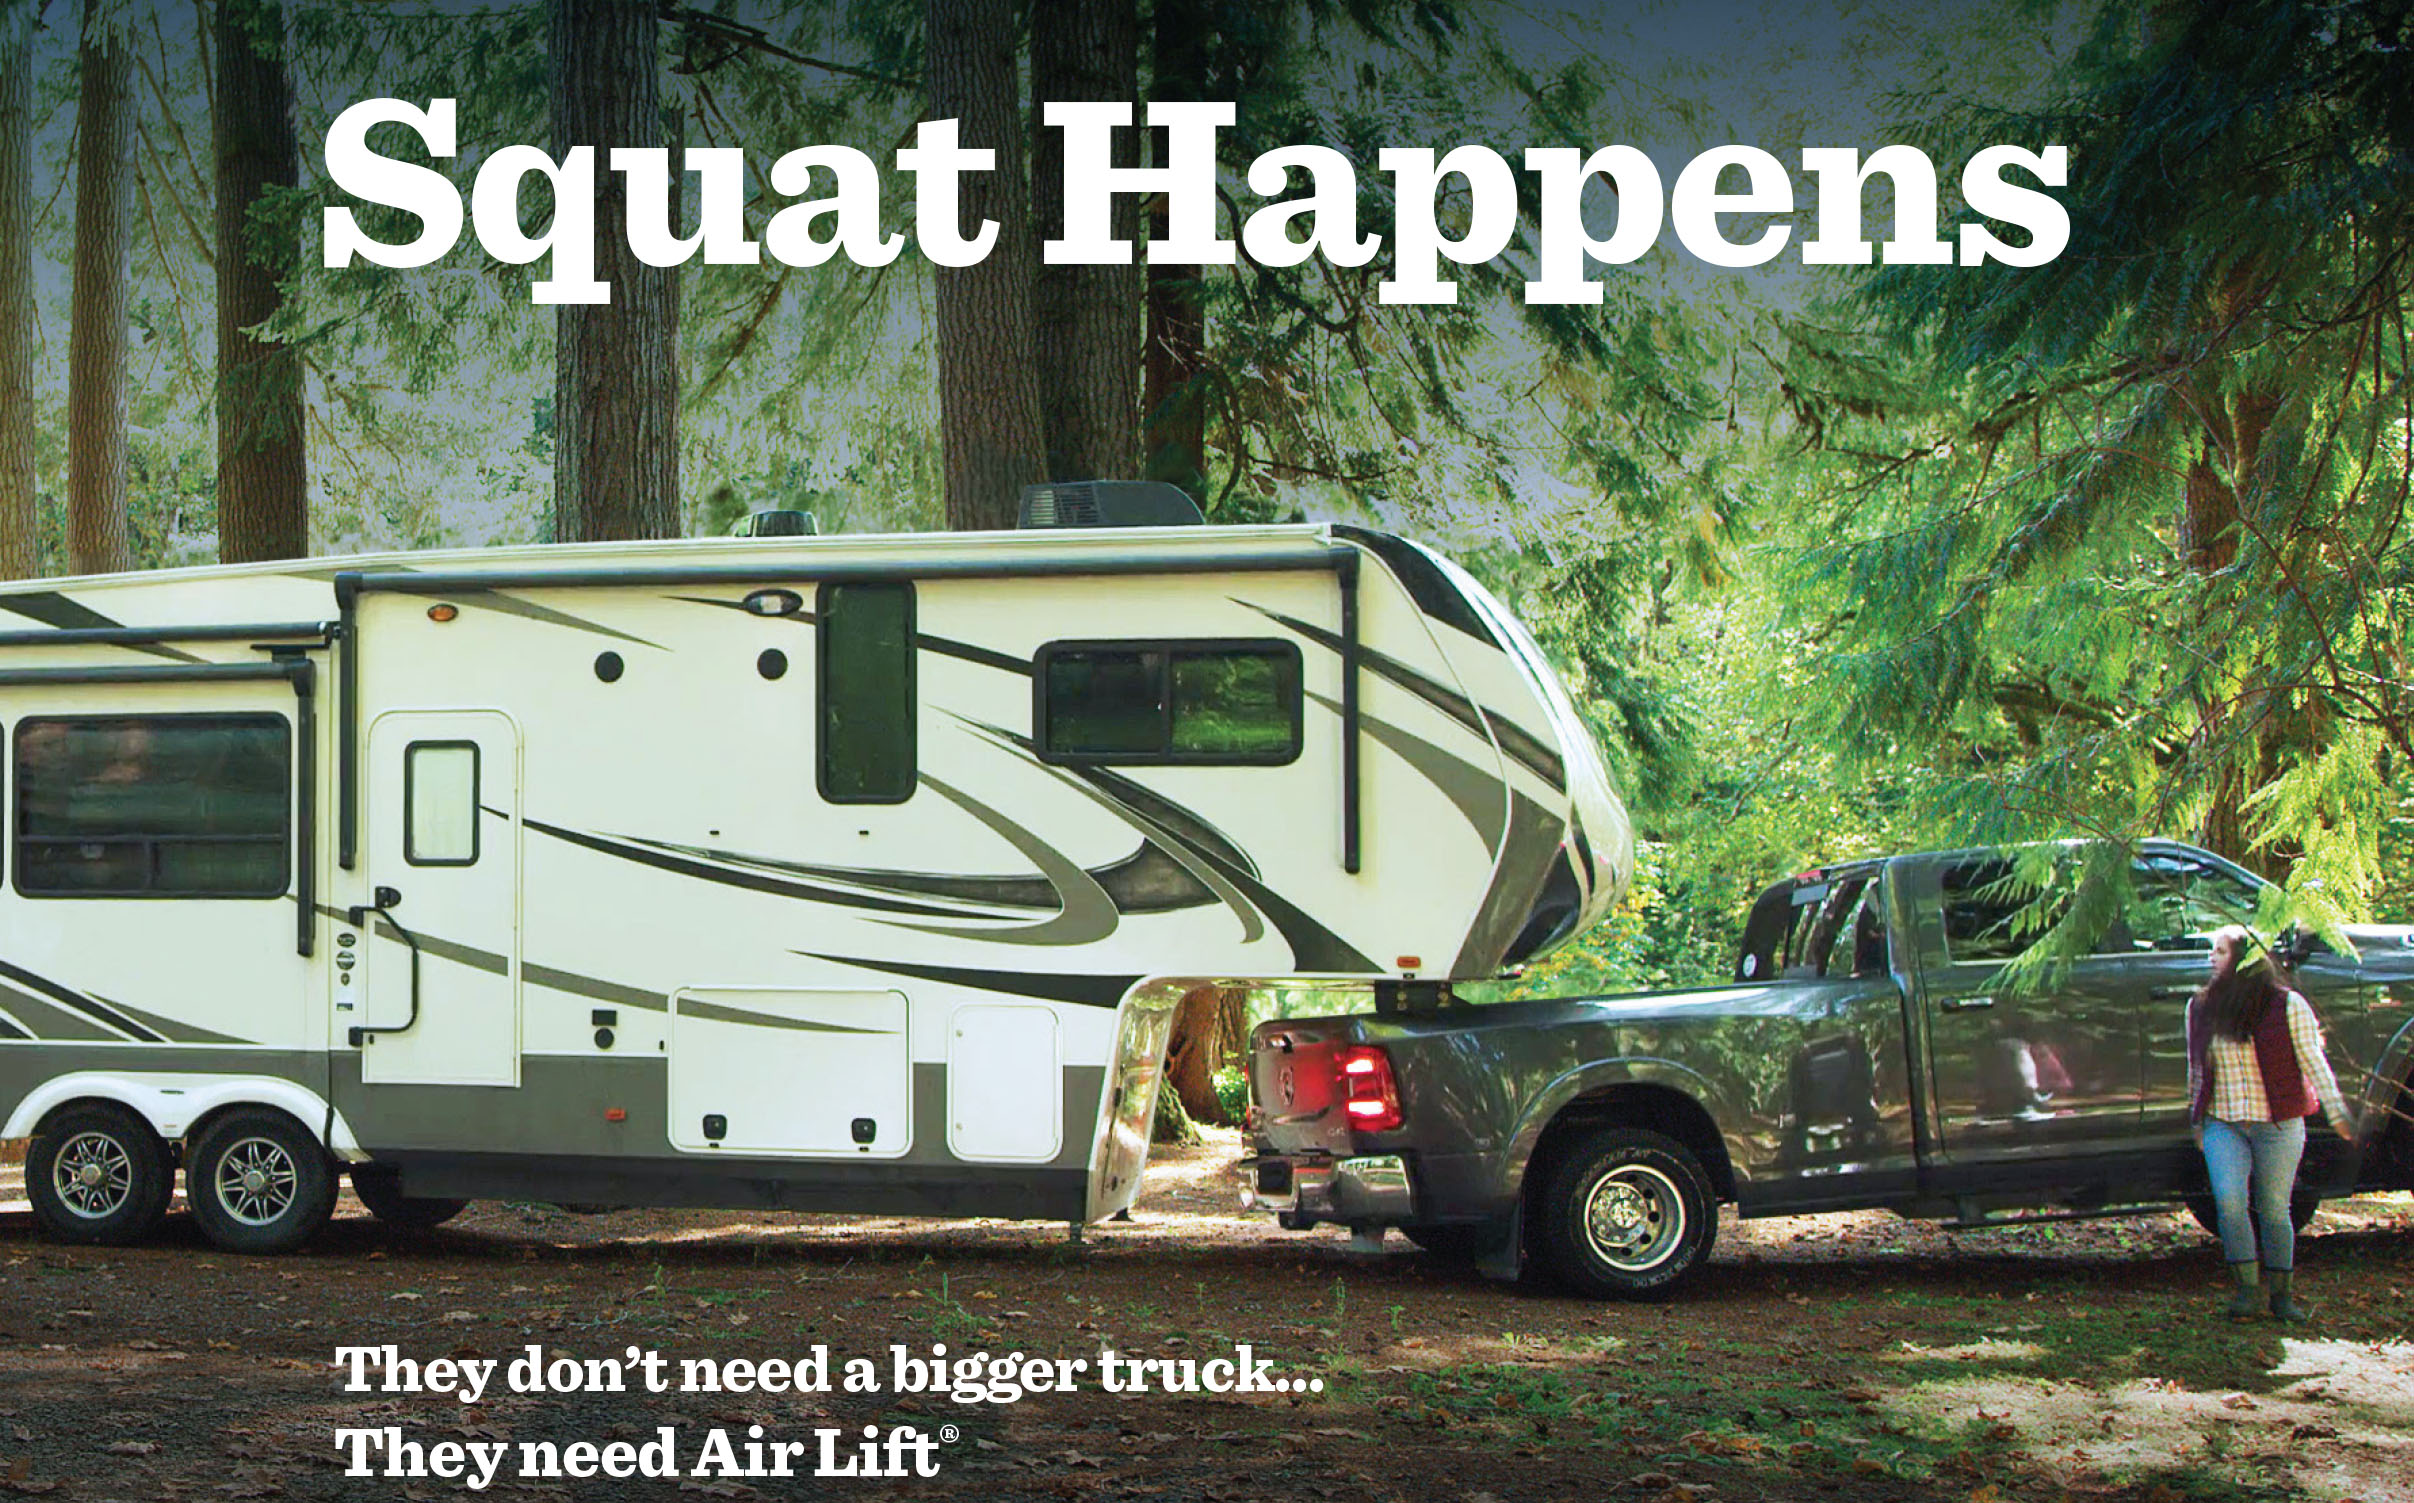 Think You Need A Bigger Truck? Air Lift Wants You To Know About Squat!